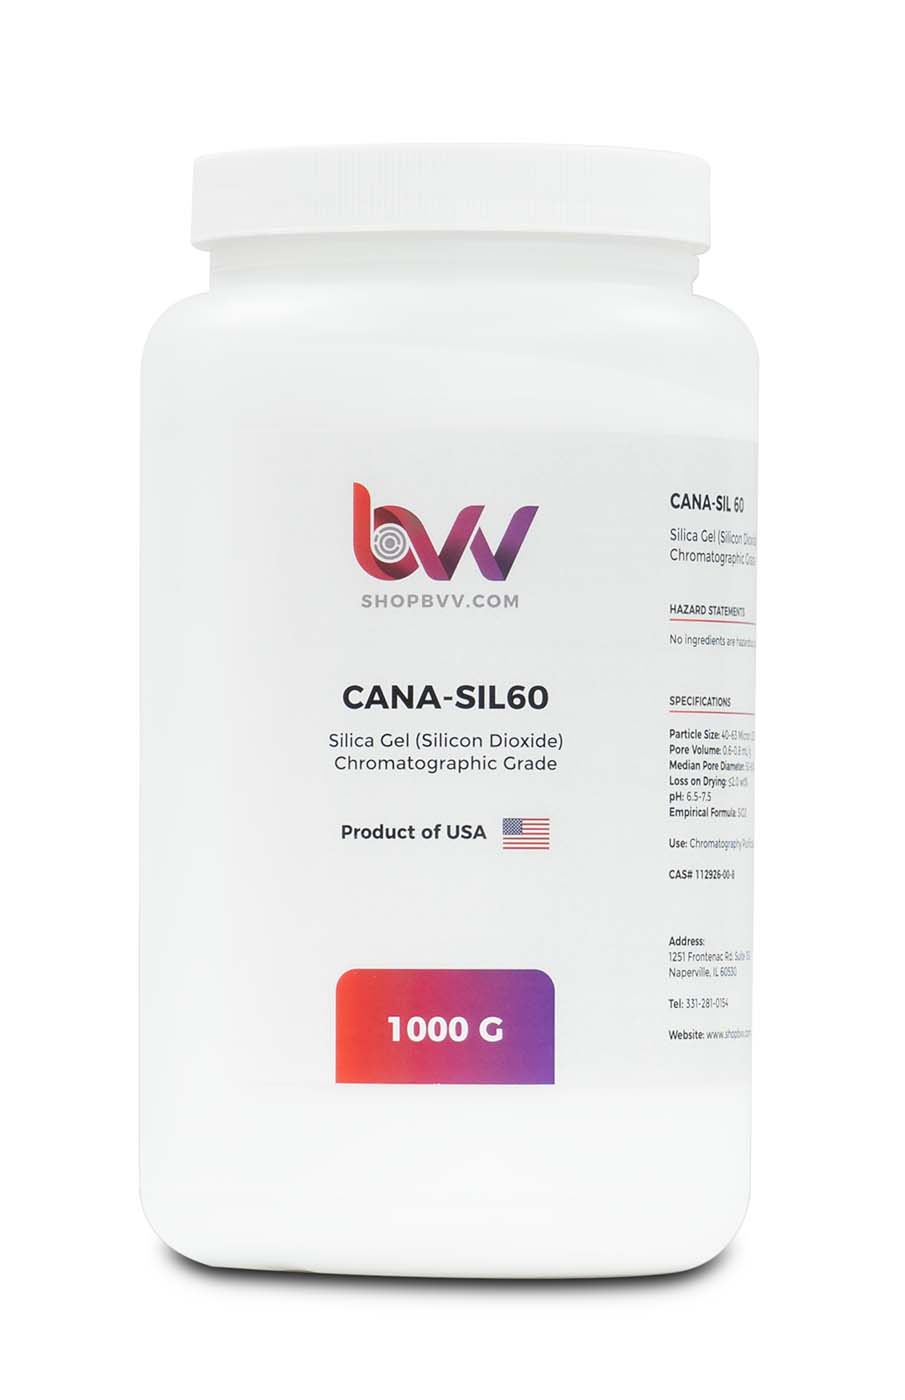 CANA-SIL60™ Silica Gel 60A Chromatographic Grade 40-63 micron (230-400 Mesh) New Products BVV 1000G 